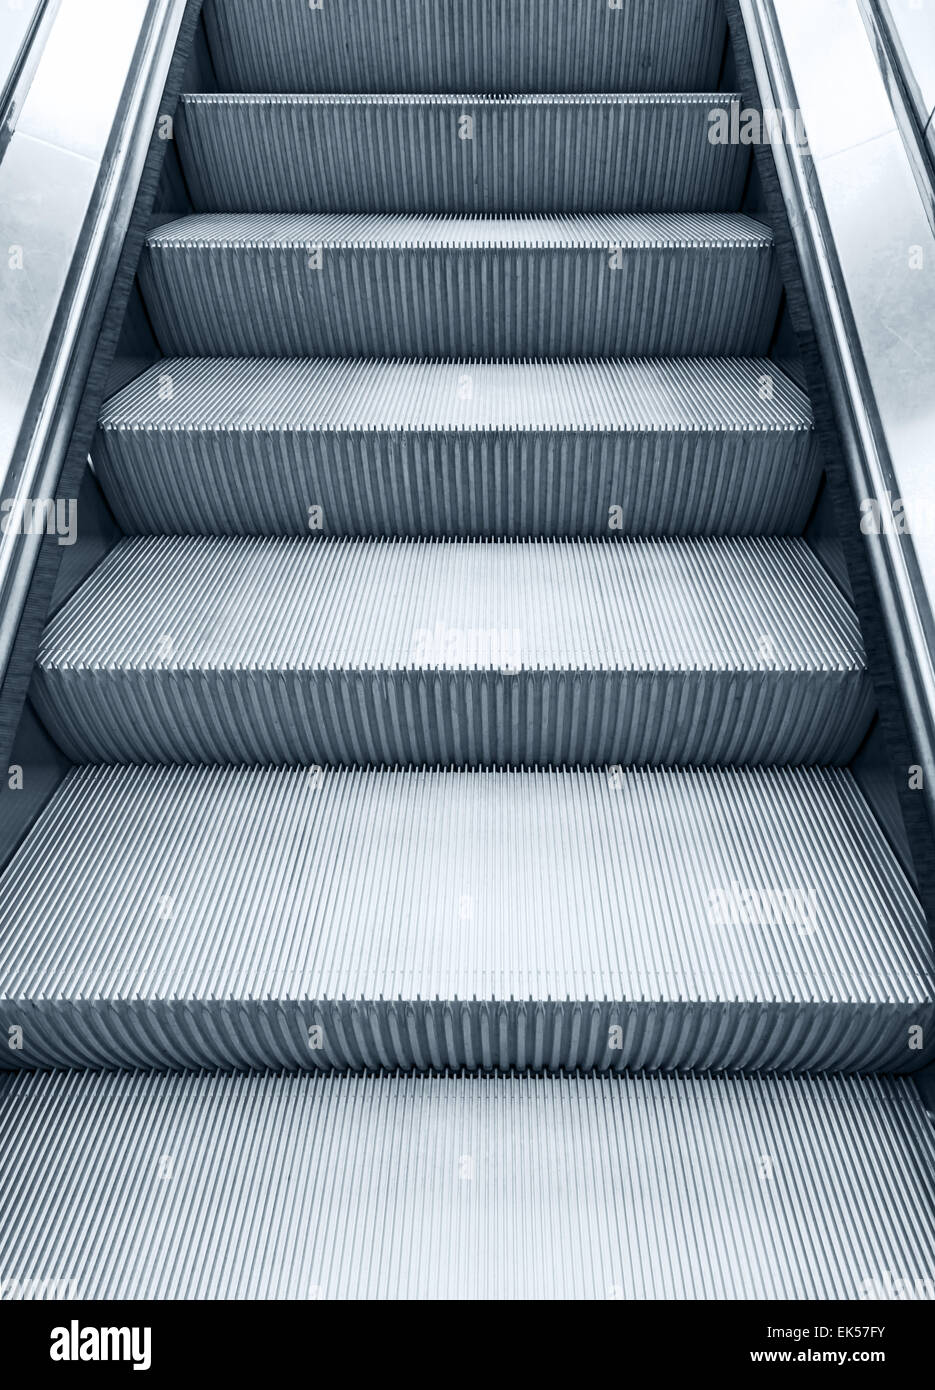 Shining metal escalator moving up, vertical monochrome photo with blue toning filter effect Stock Photo